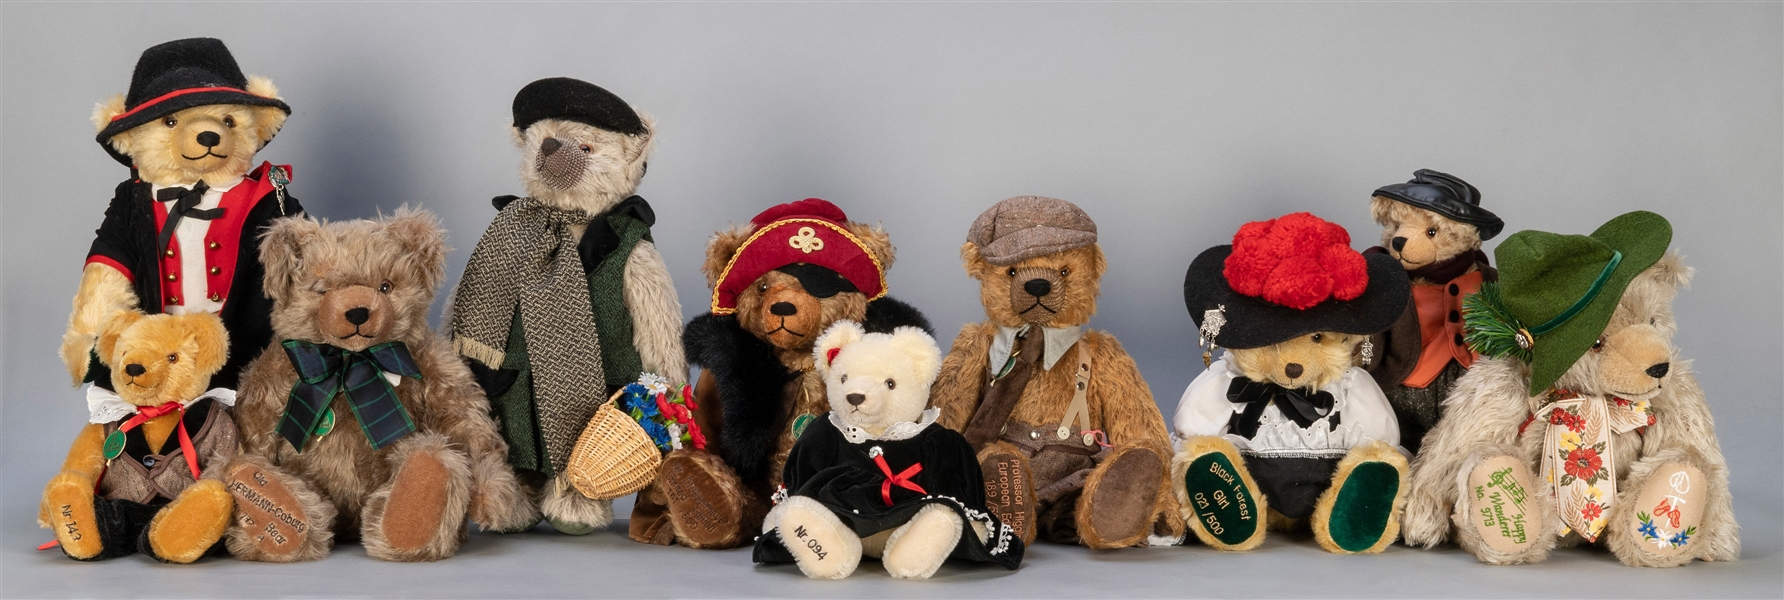  Collection of 13 Hermann Teddy Bears. 1990s/2000s. Collecti...